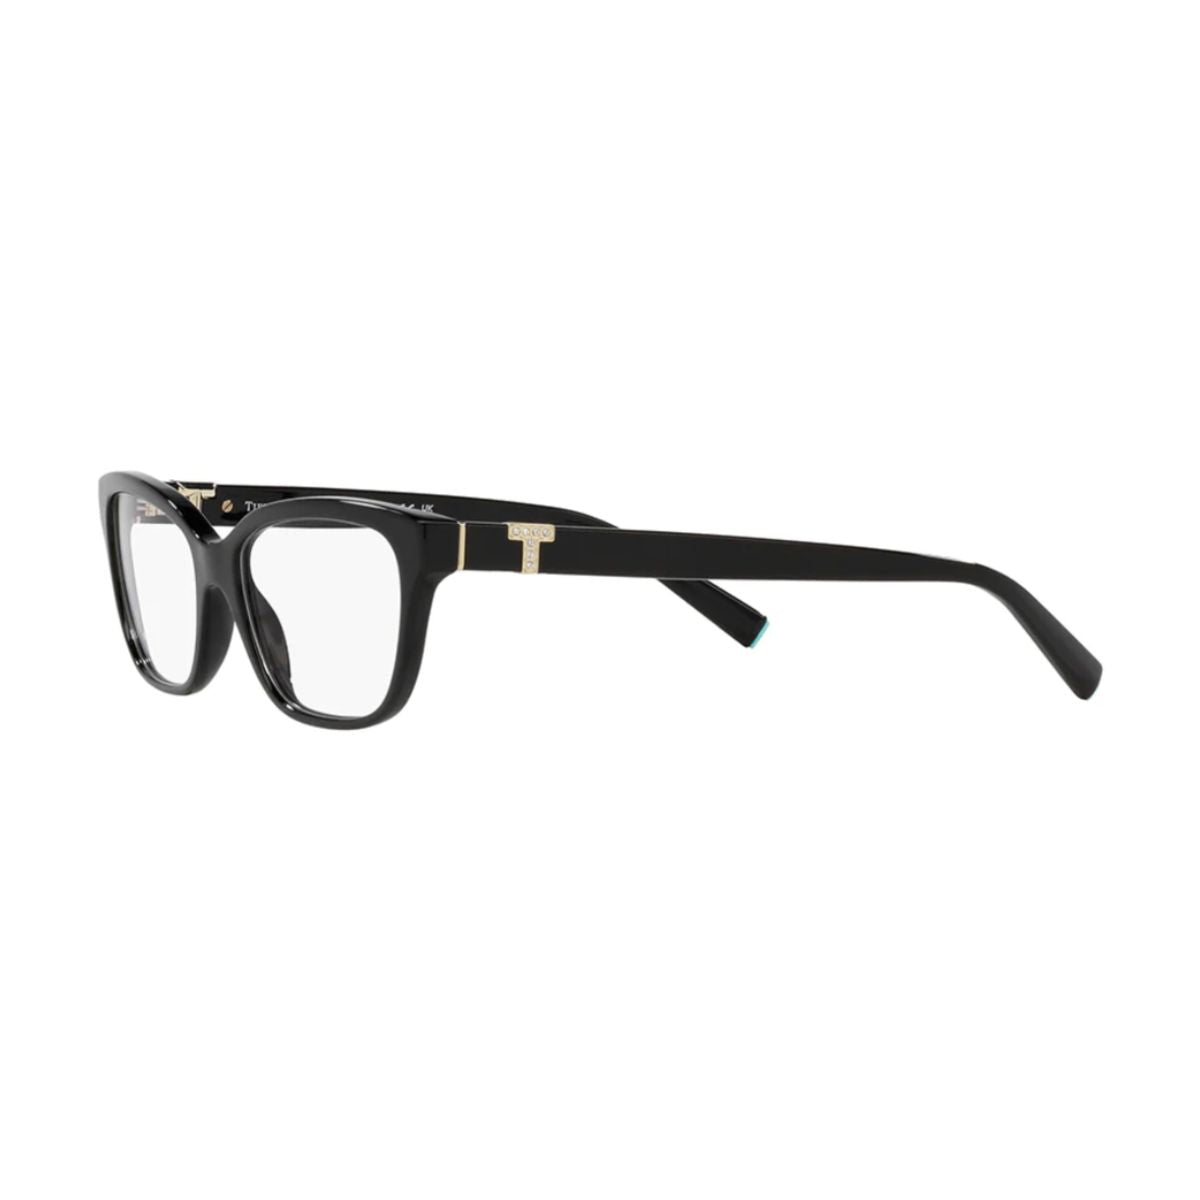 "Tiffany And Co 2233-B 8001 spectacle eyewear frame for women's at optorium"